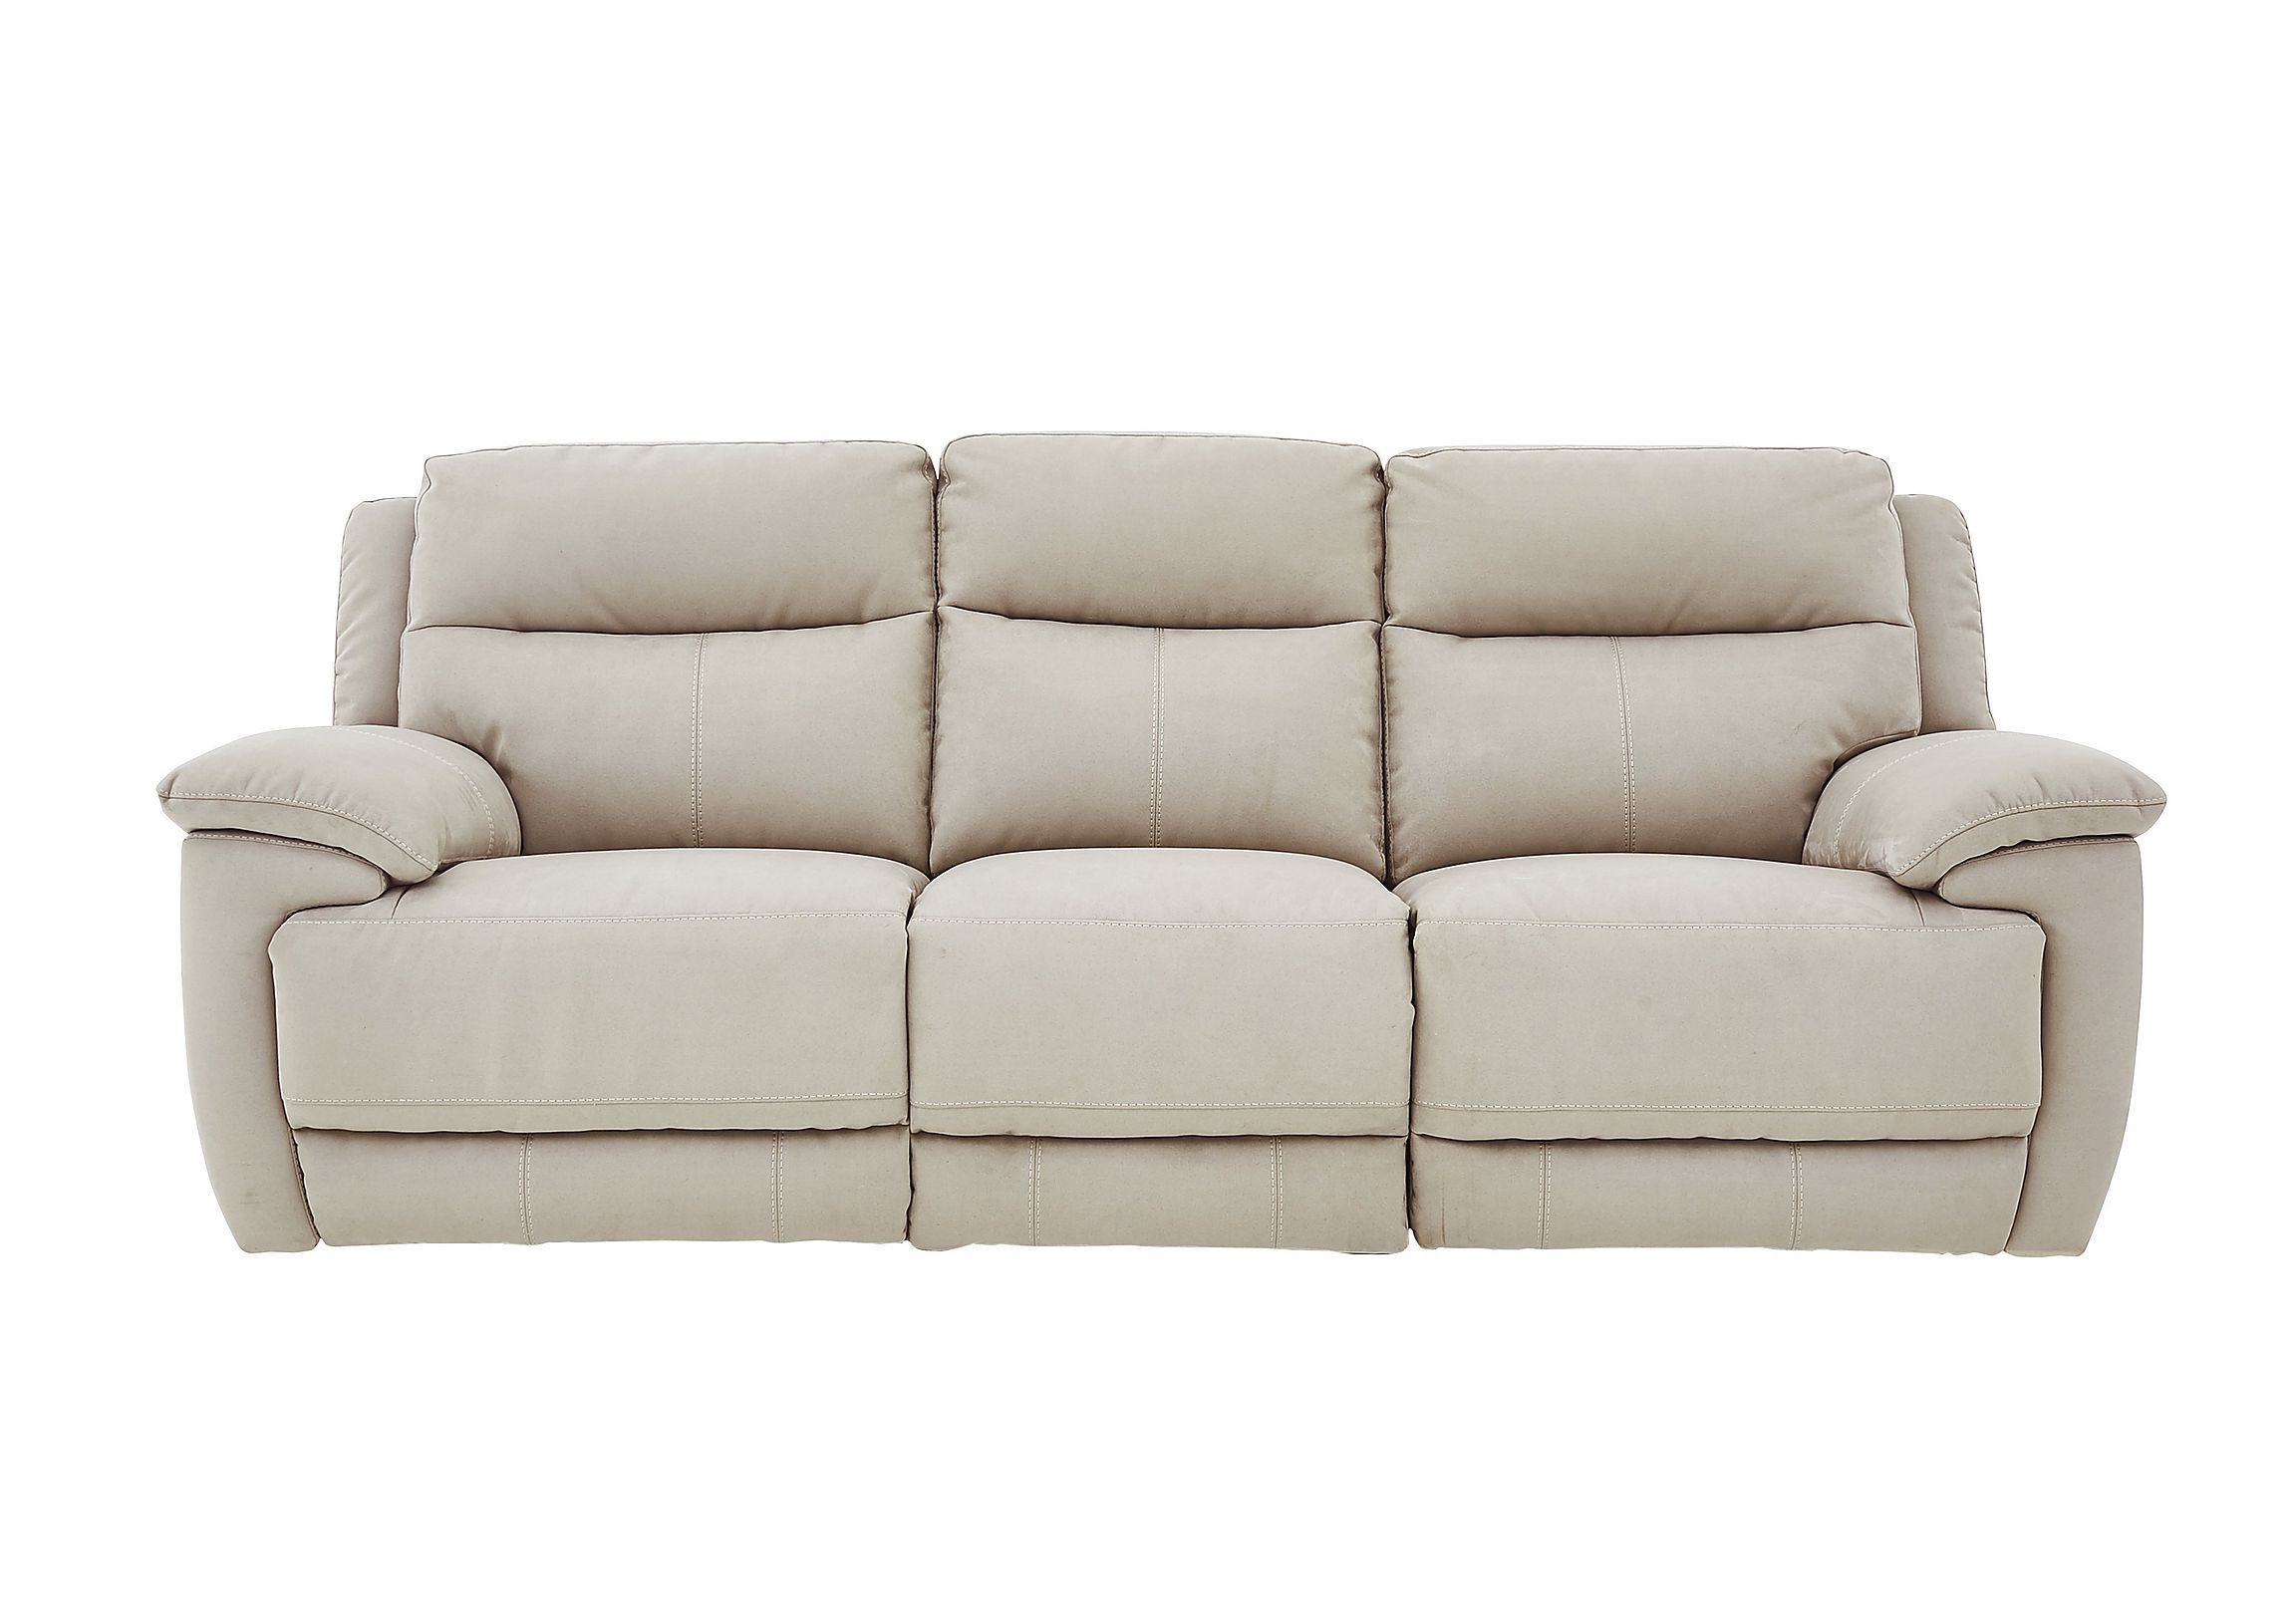 Preferred 2pc Luxurious And Plush Corduroy Sectional Sofas Brown Within Great Value Modern 3 Seater Sofa With Touchably Soft Touch (View 18 of 25)